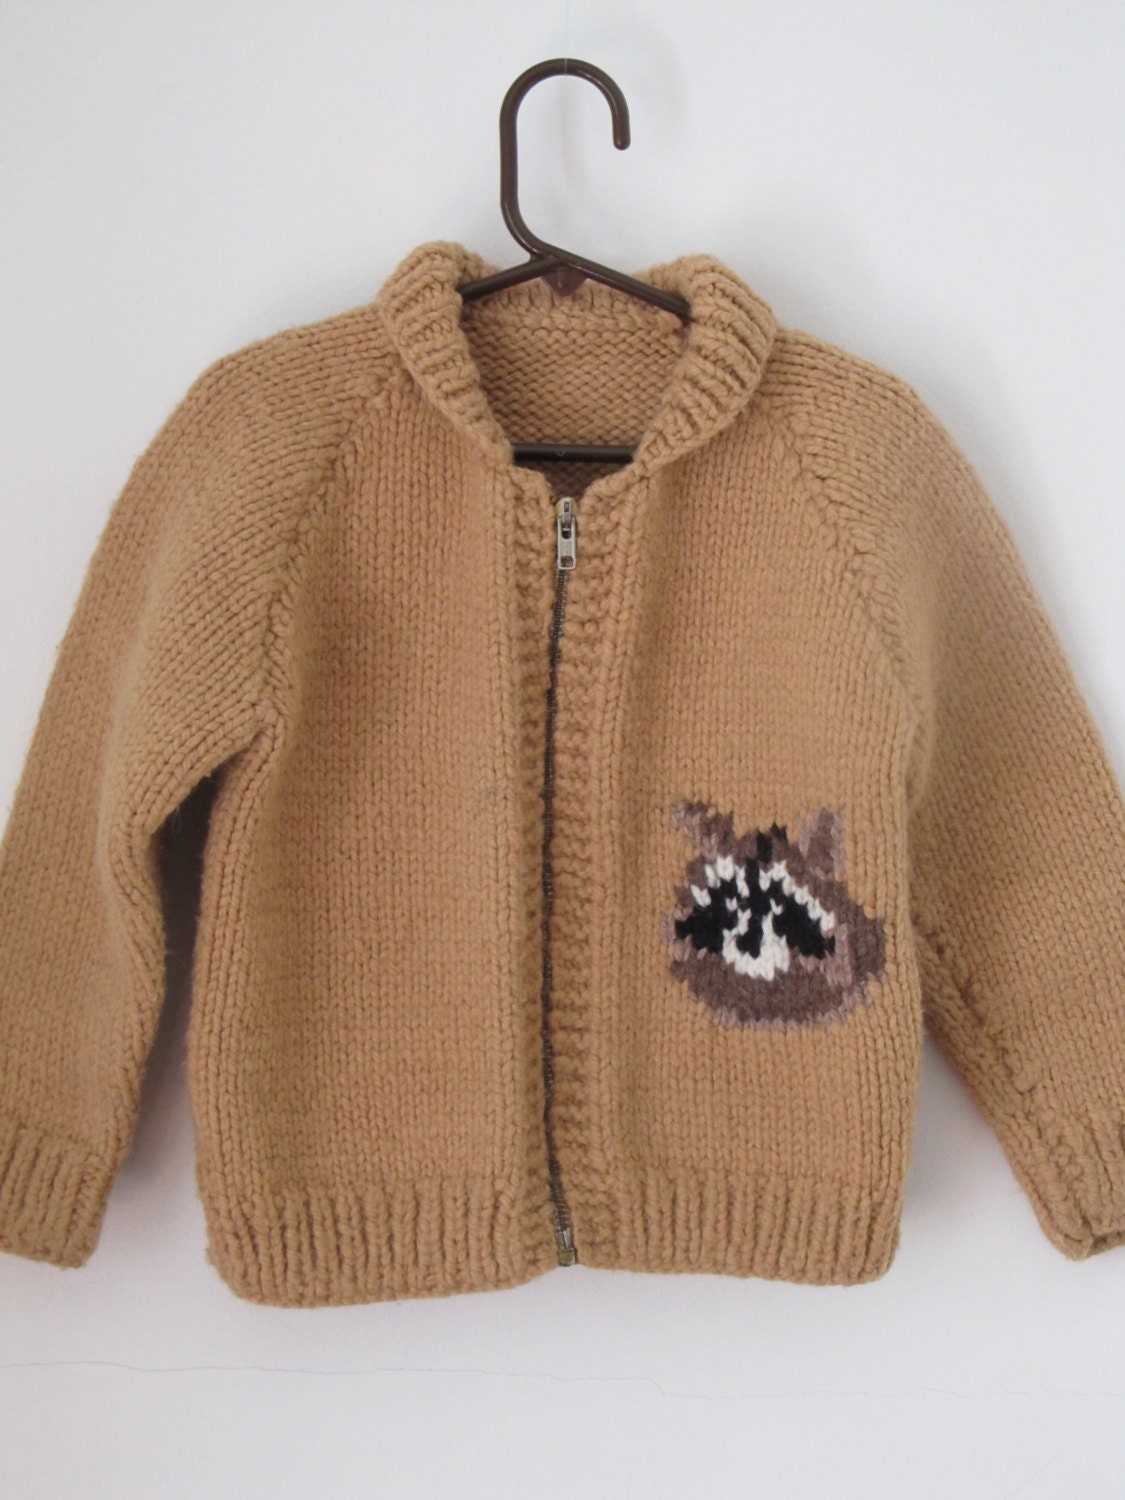 Child's Cowichan Hand Knit Wool Sweater With by SPECIALFXofALBANY